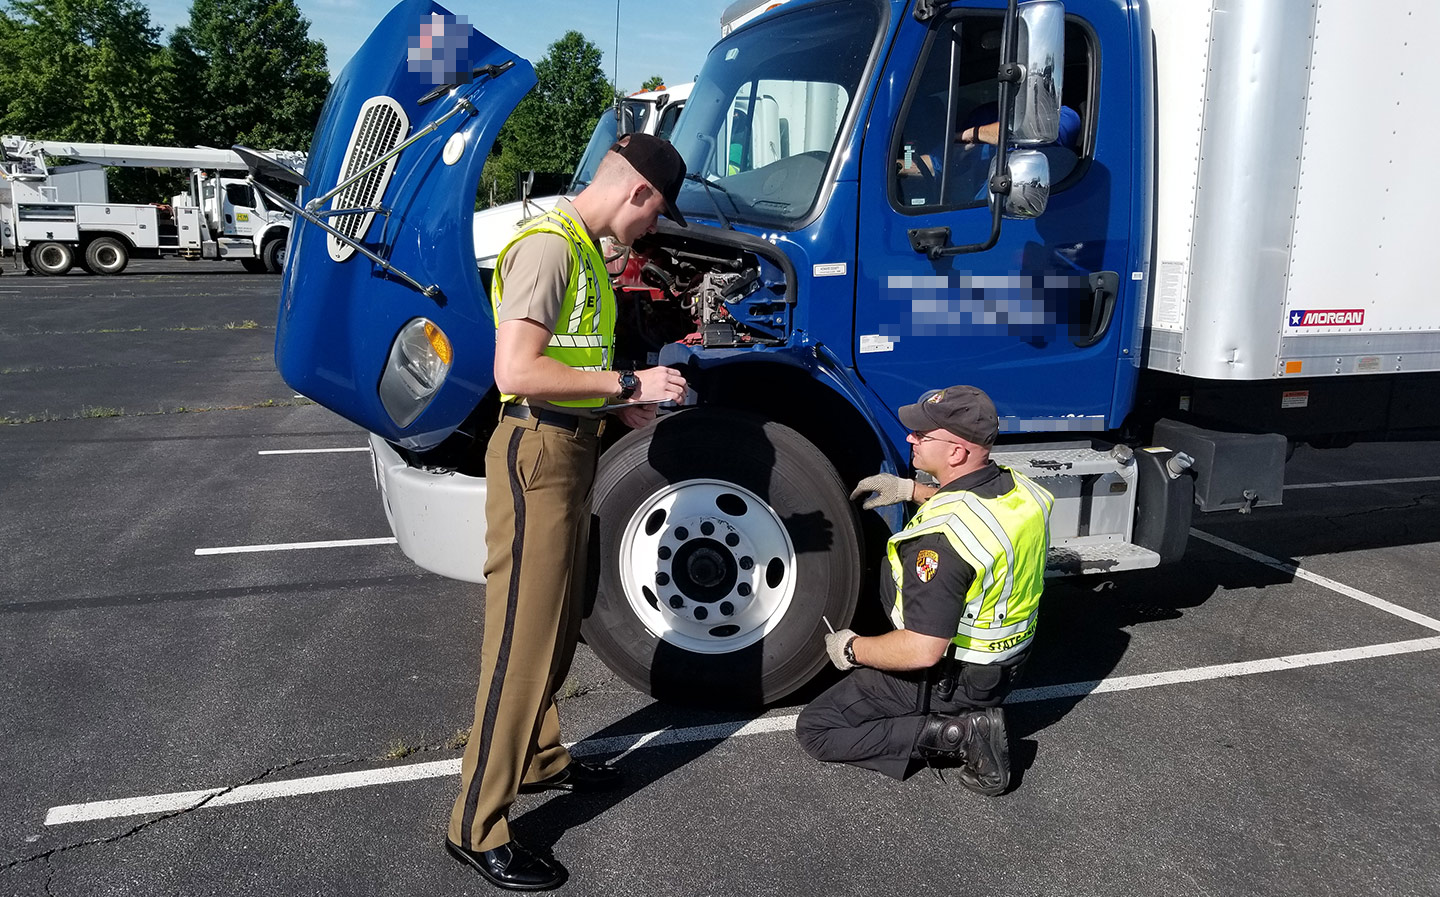 Maryland Police pull over 500 trucks in single day for safety inspections